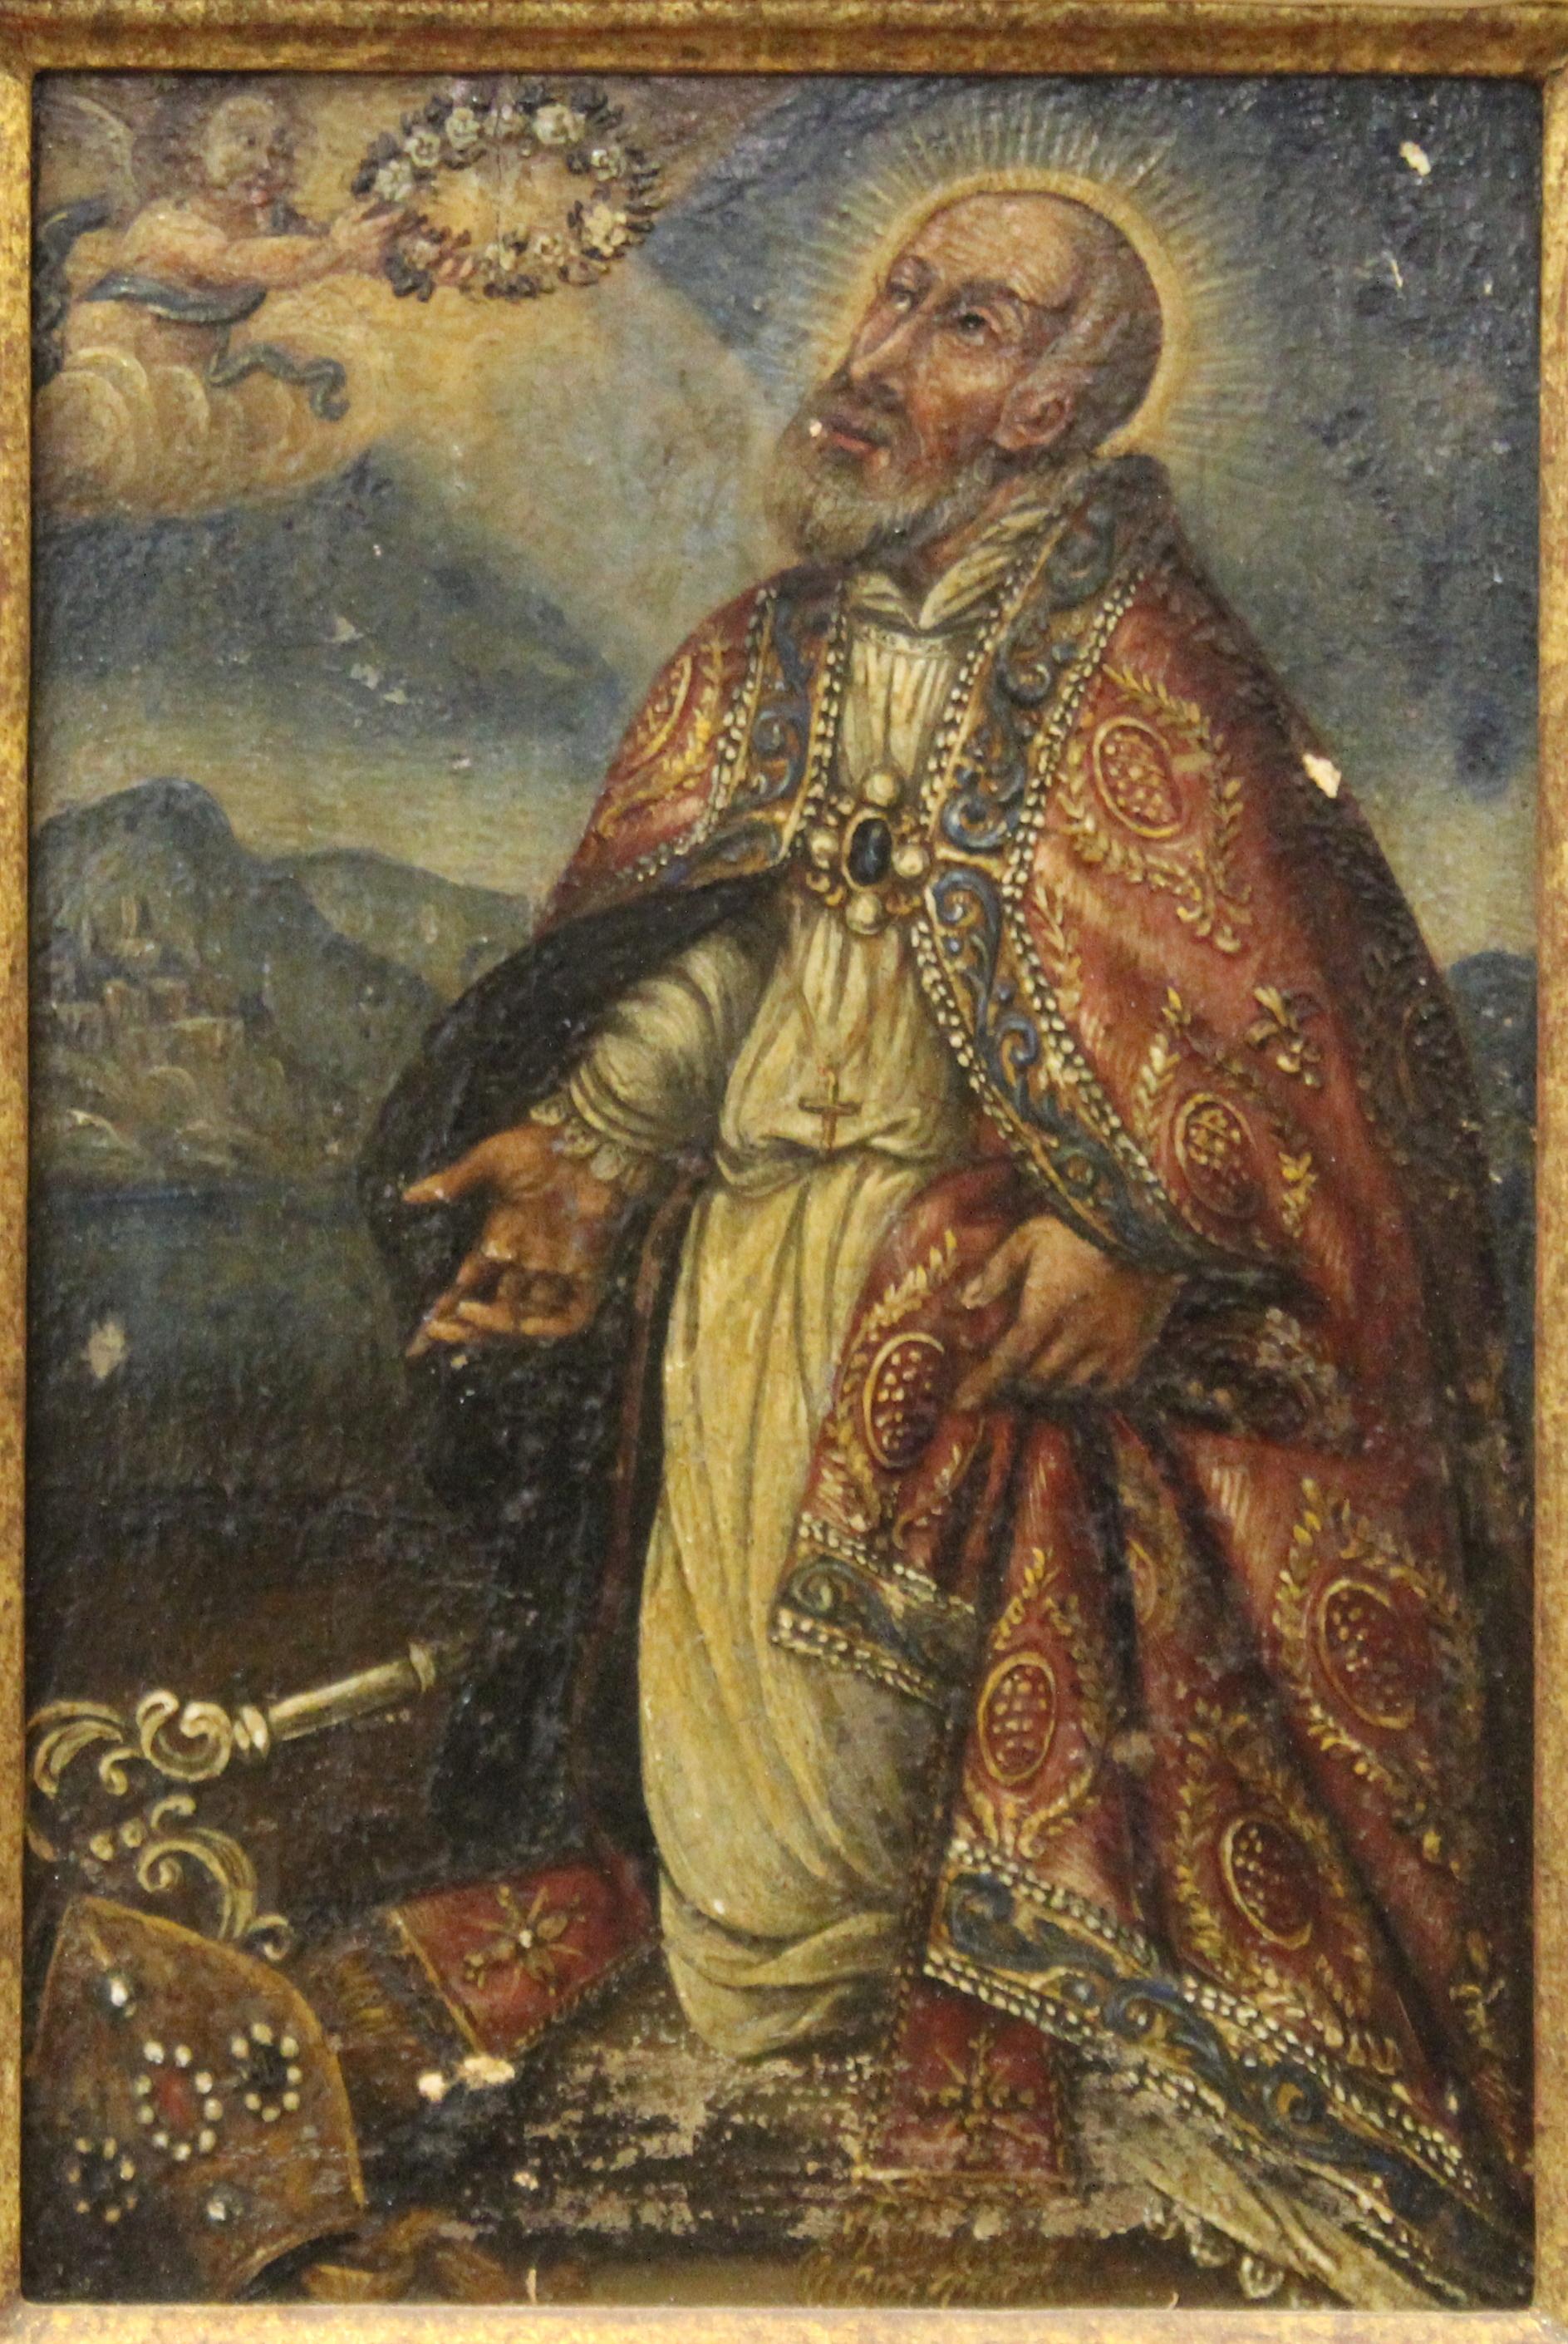 Spanish colonial oil on panel painting depicting a kneeling saint or bishop being adorned with floral wreath by an angel in the upper left corner. The piece is housed in a Kulicke giltwood frame.
Image: 7.625